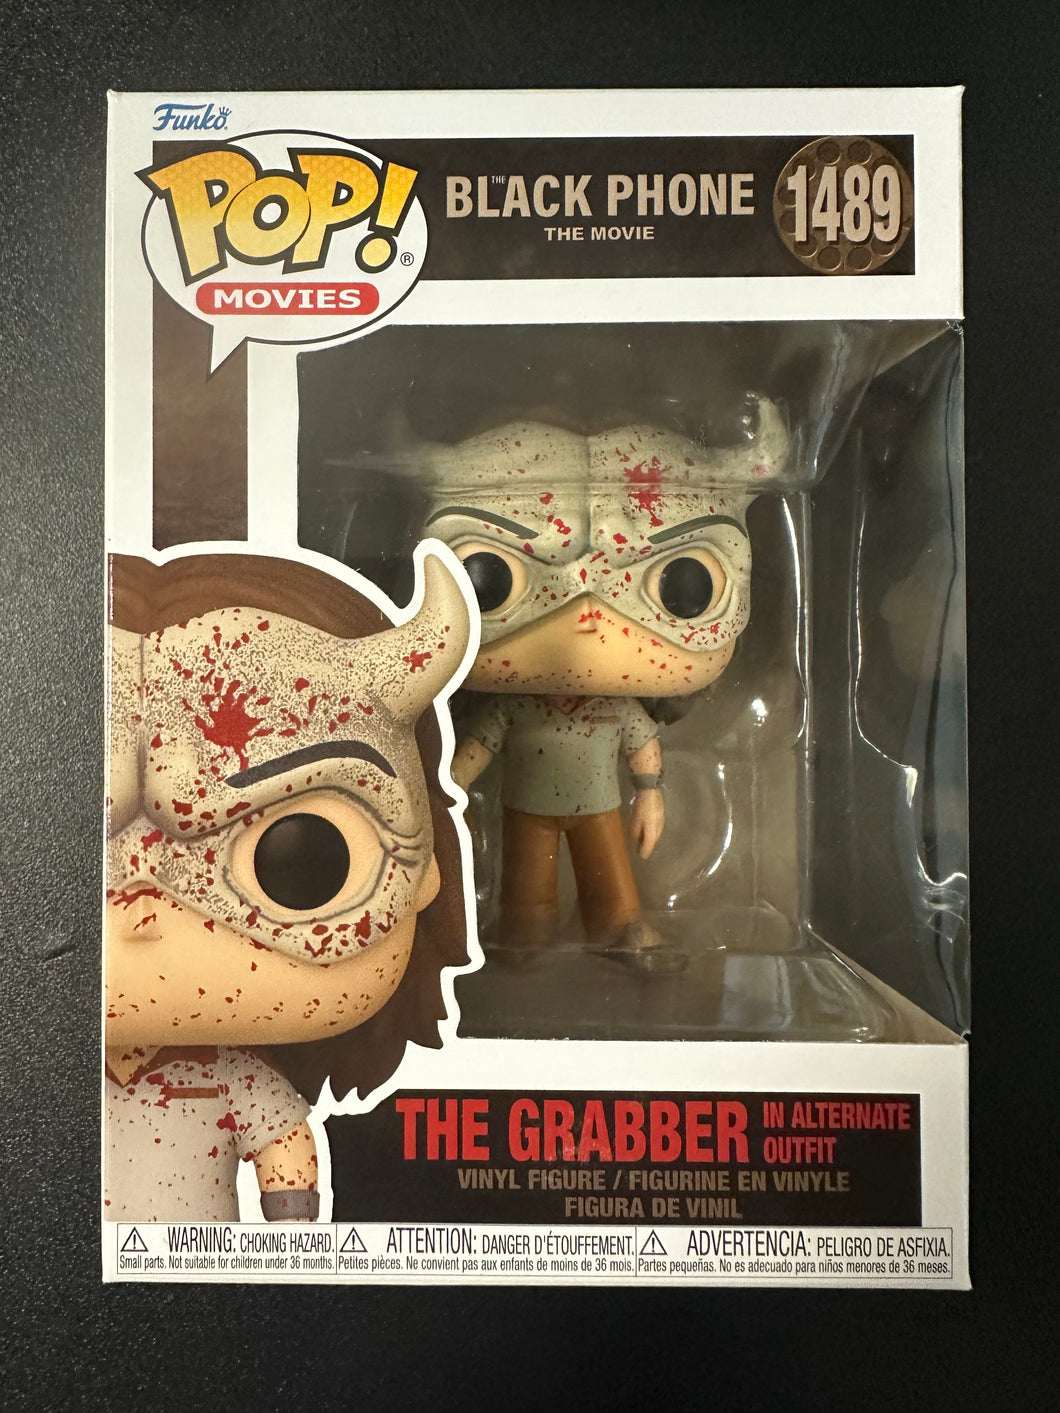 FUNKO POP MOVIES BLACK PHONE THE GRABBER IN ALTERNATE OUTFIT BLOODY 1489